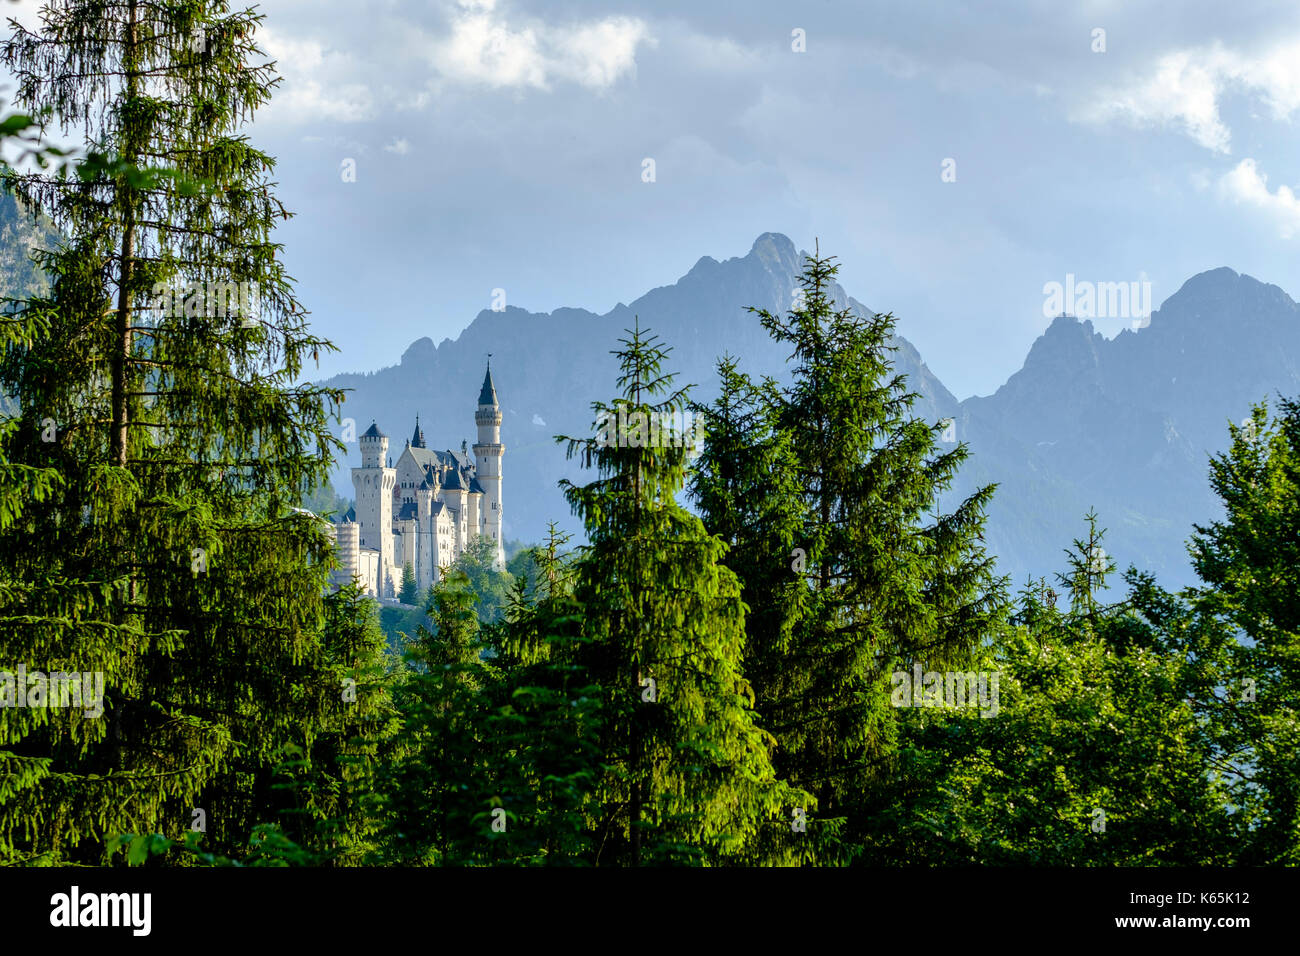 Neuschwanstein Castle, seen through trees in front of high mountains Stock Photo